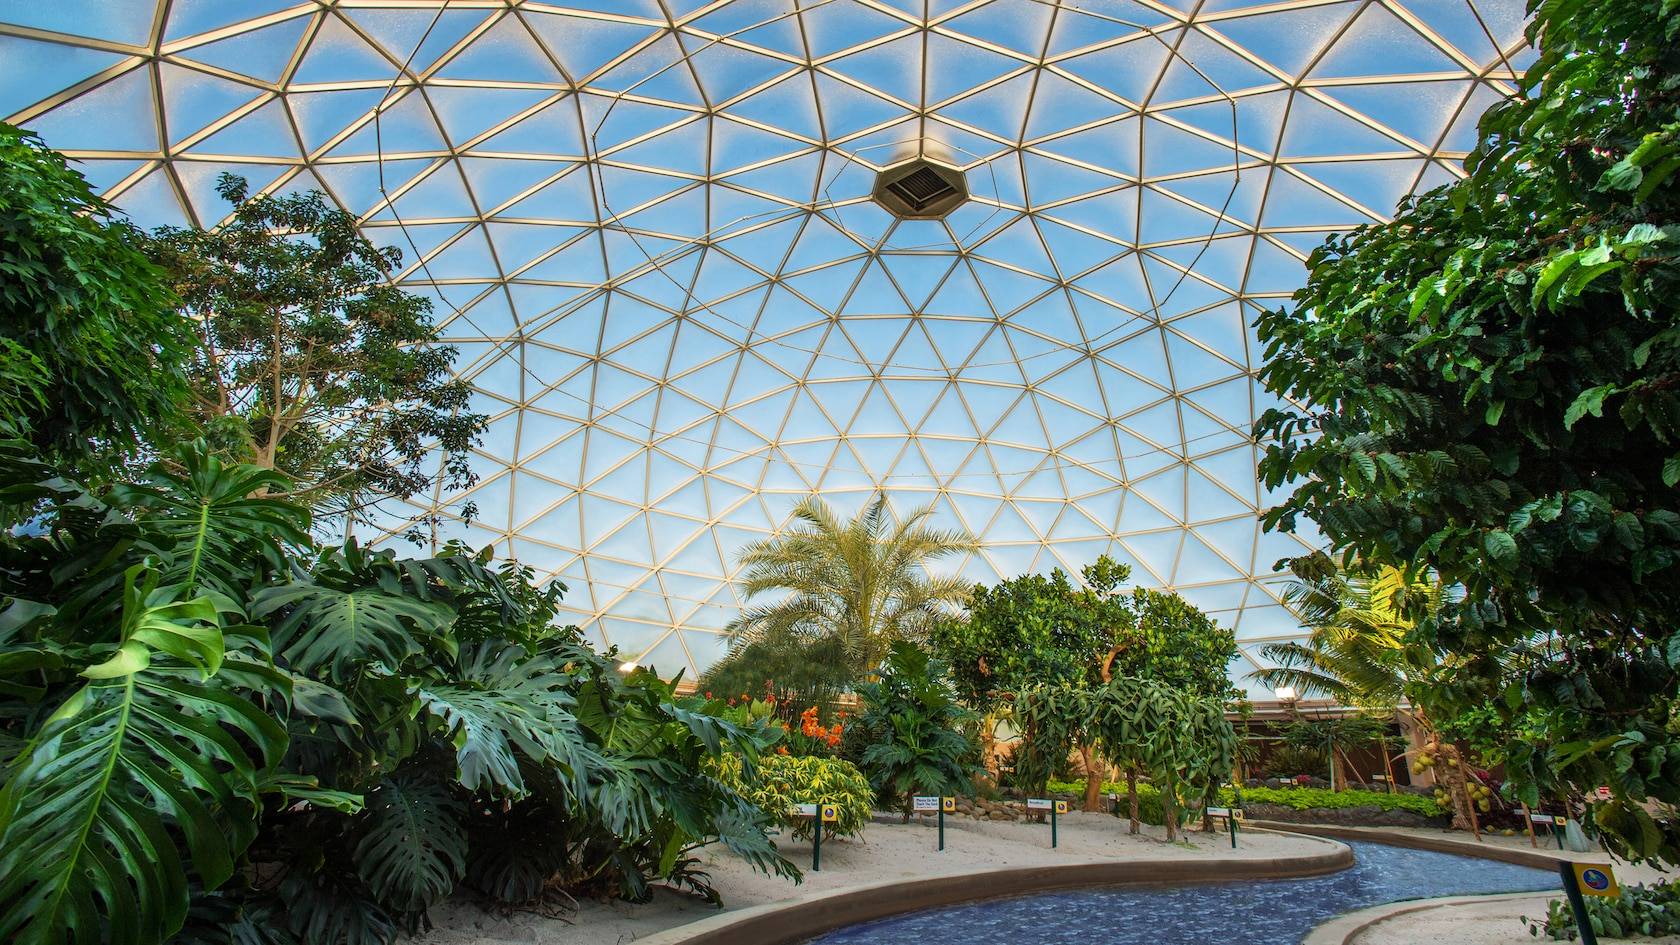 EPCOT'S Living with the Land remains closed since last week with technical problems